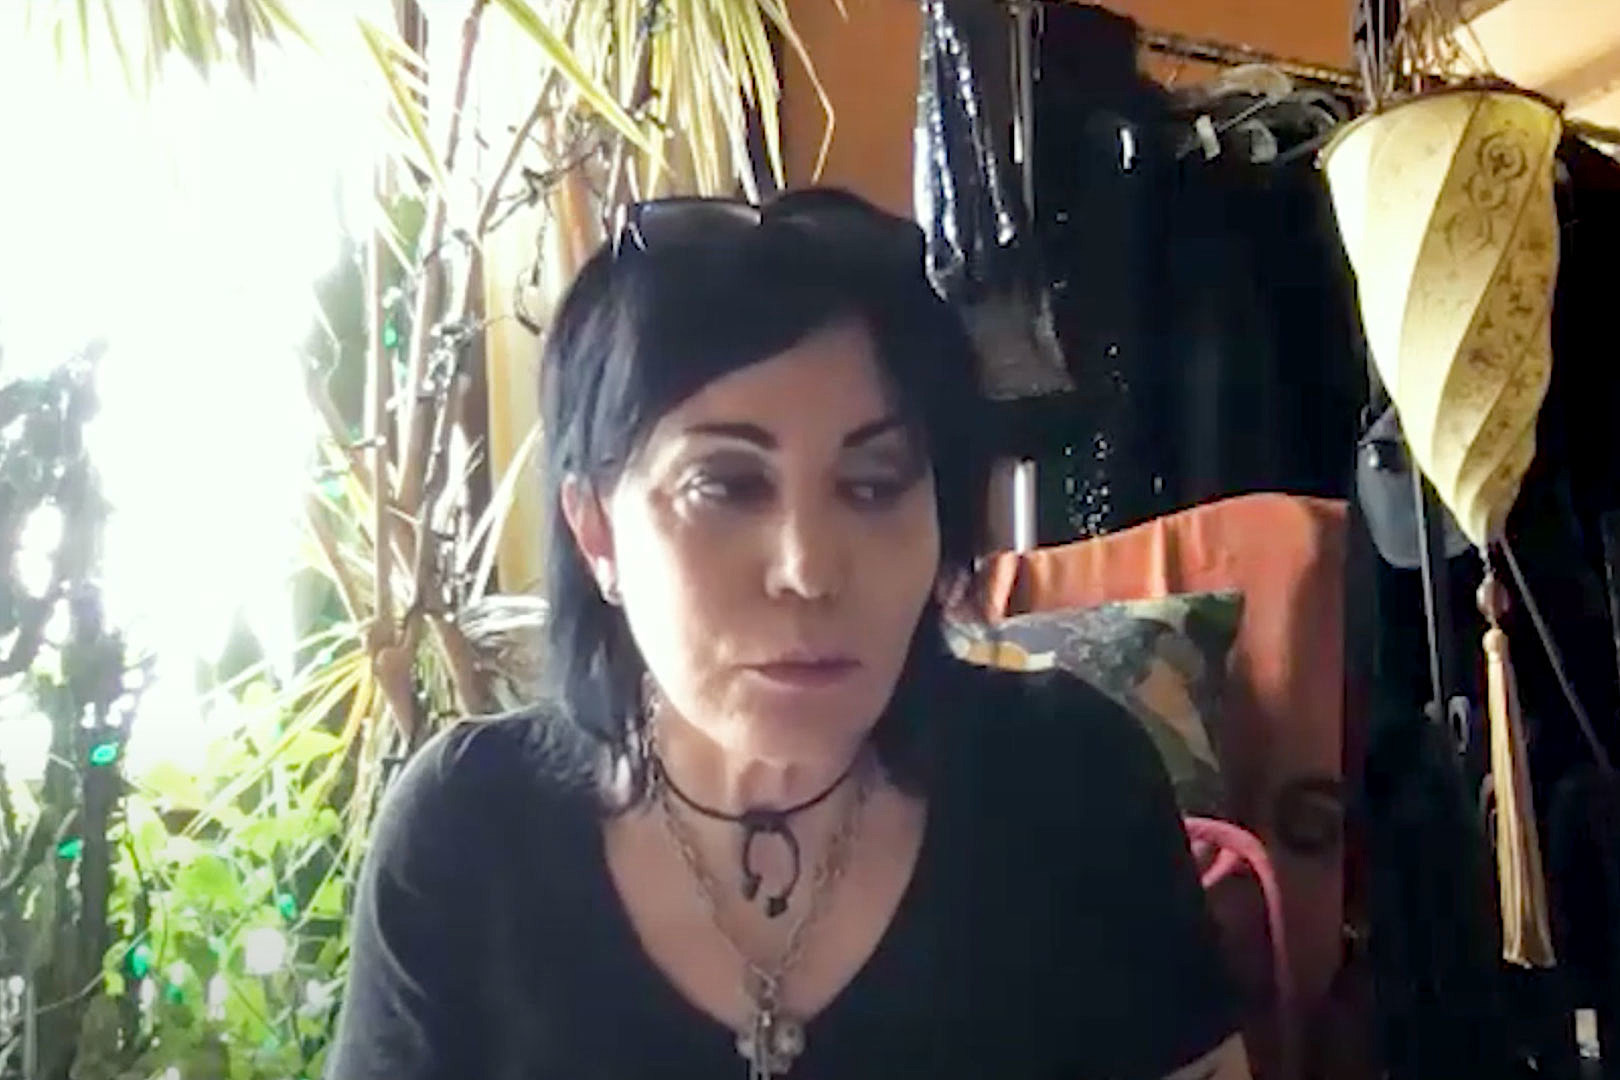 Joan Jett Would Not Feel Comfortable Touring During Pandemic